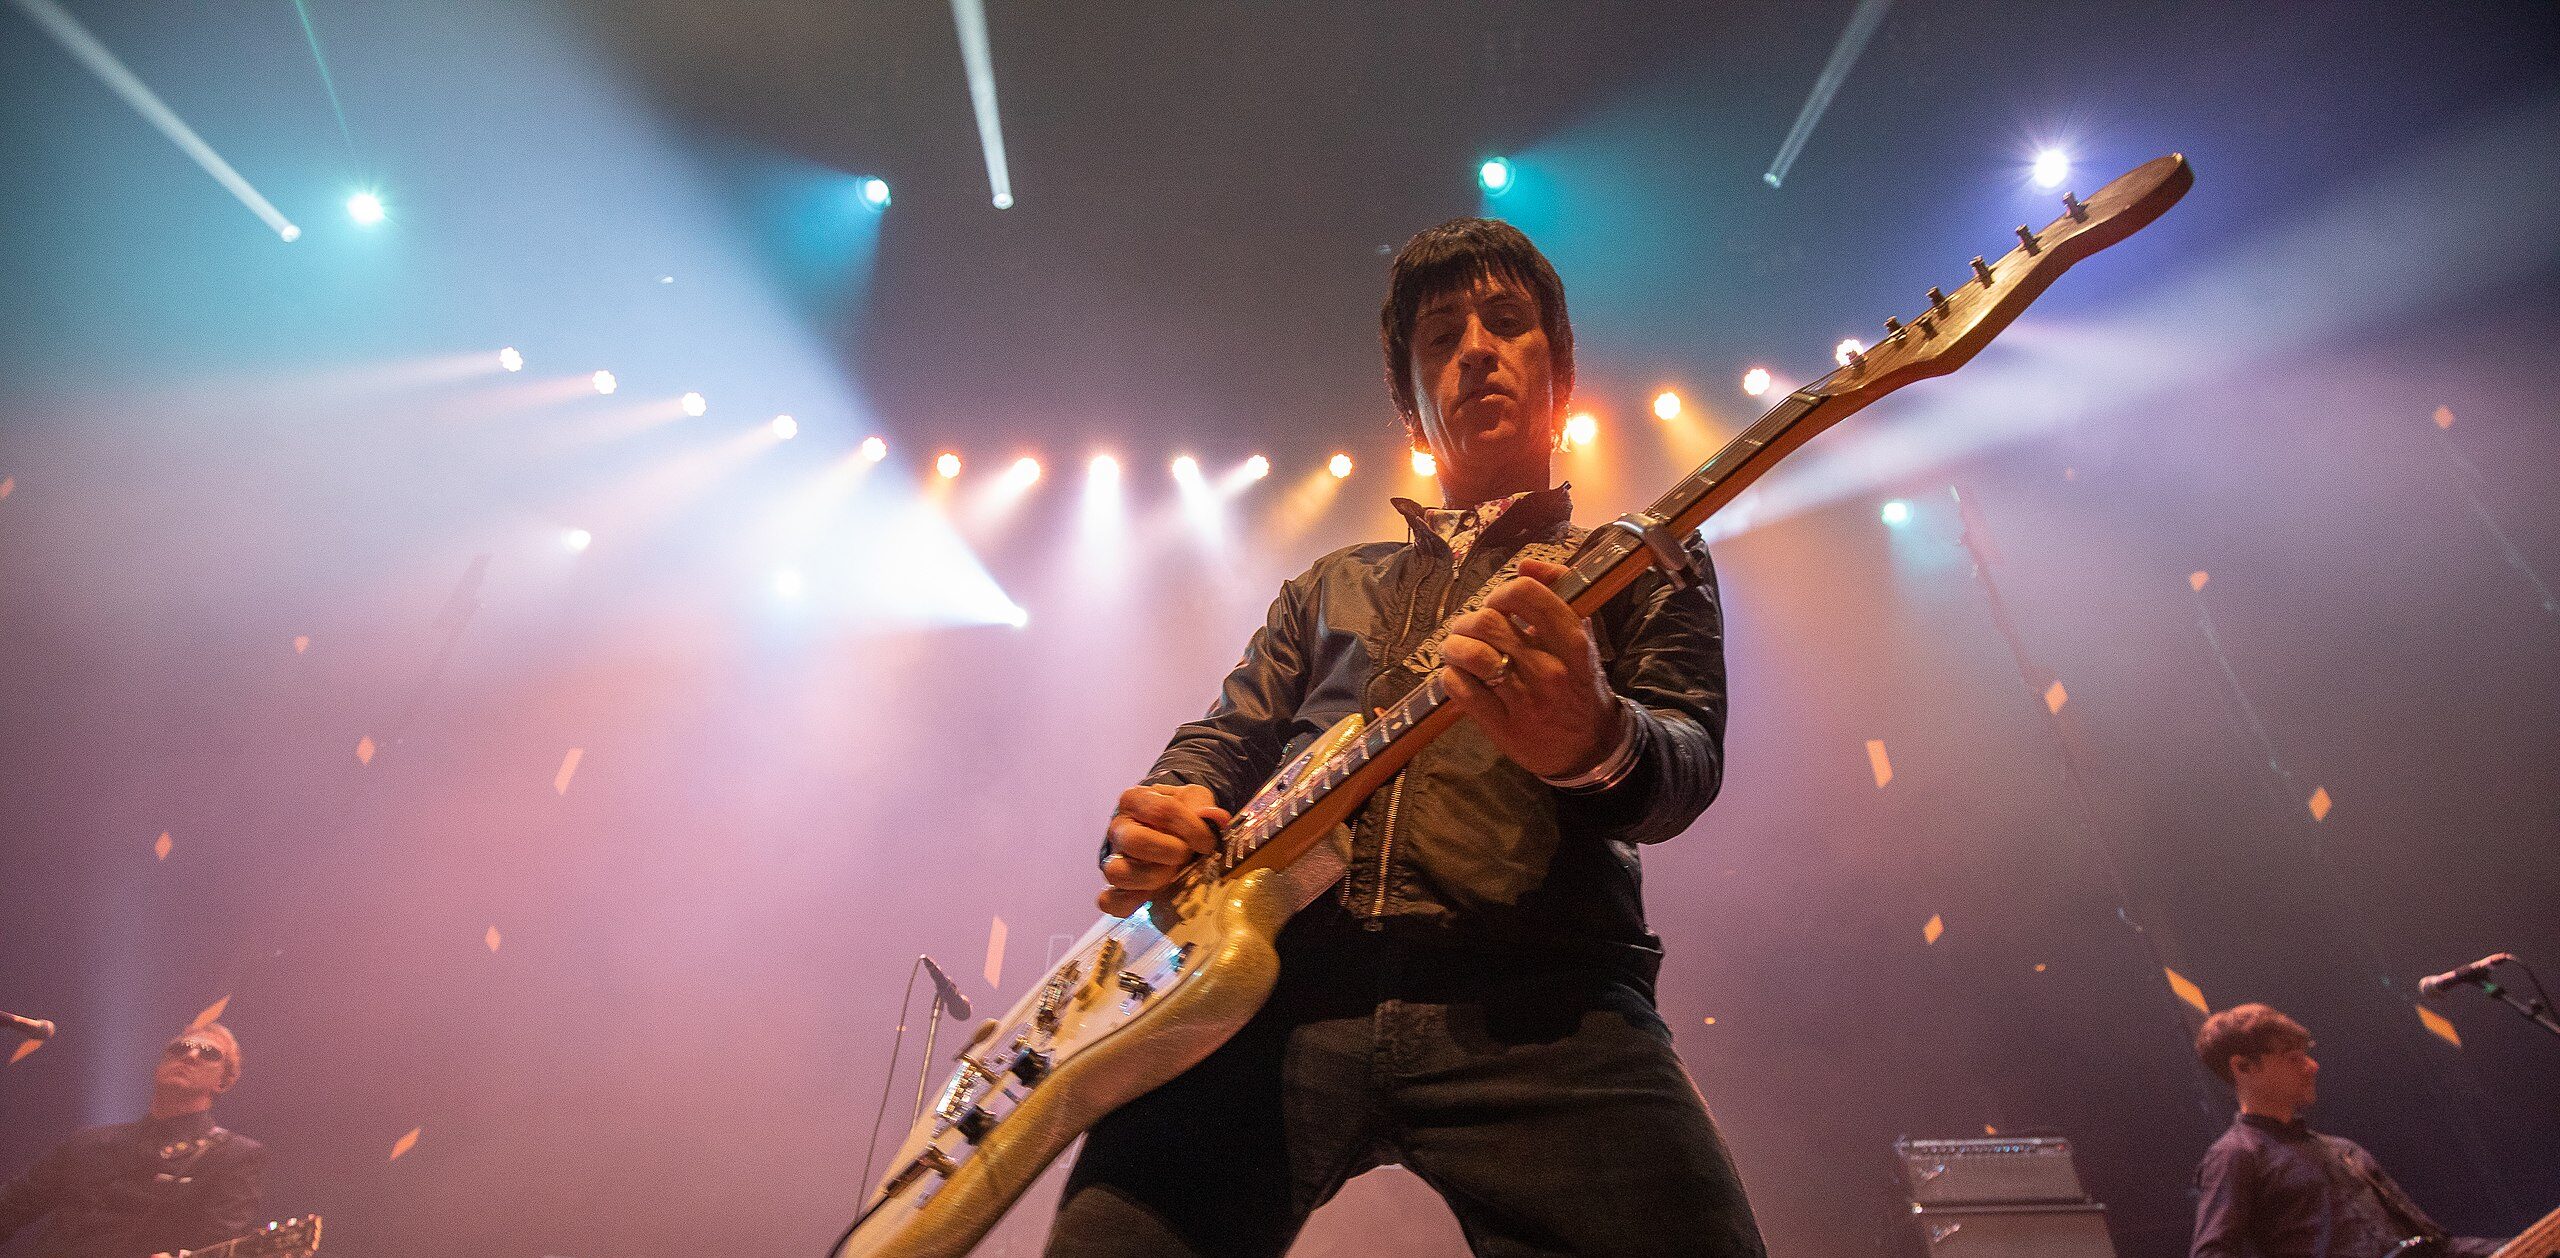 Johnny Marr playing guitar on stage.